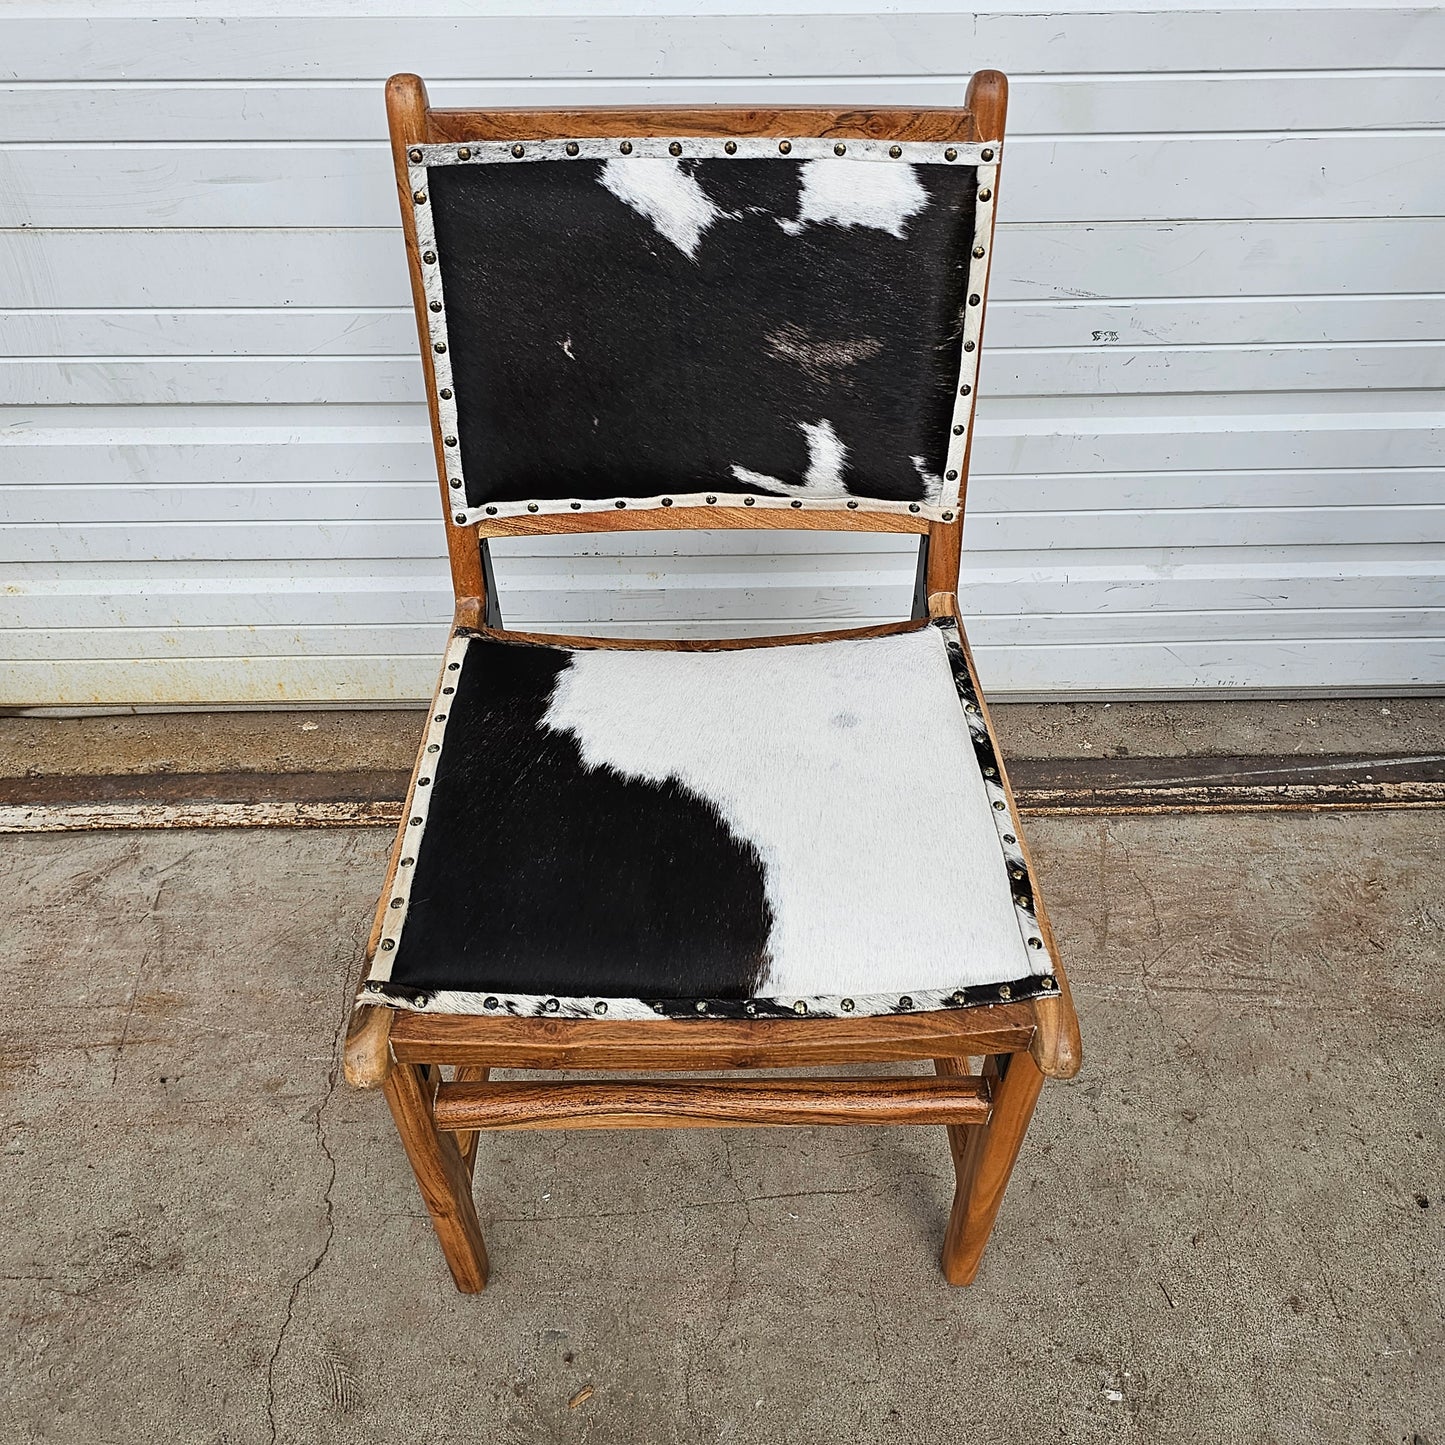 Wood Chair w/Cow Hide Seat